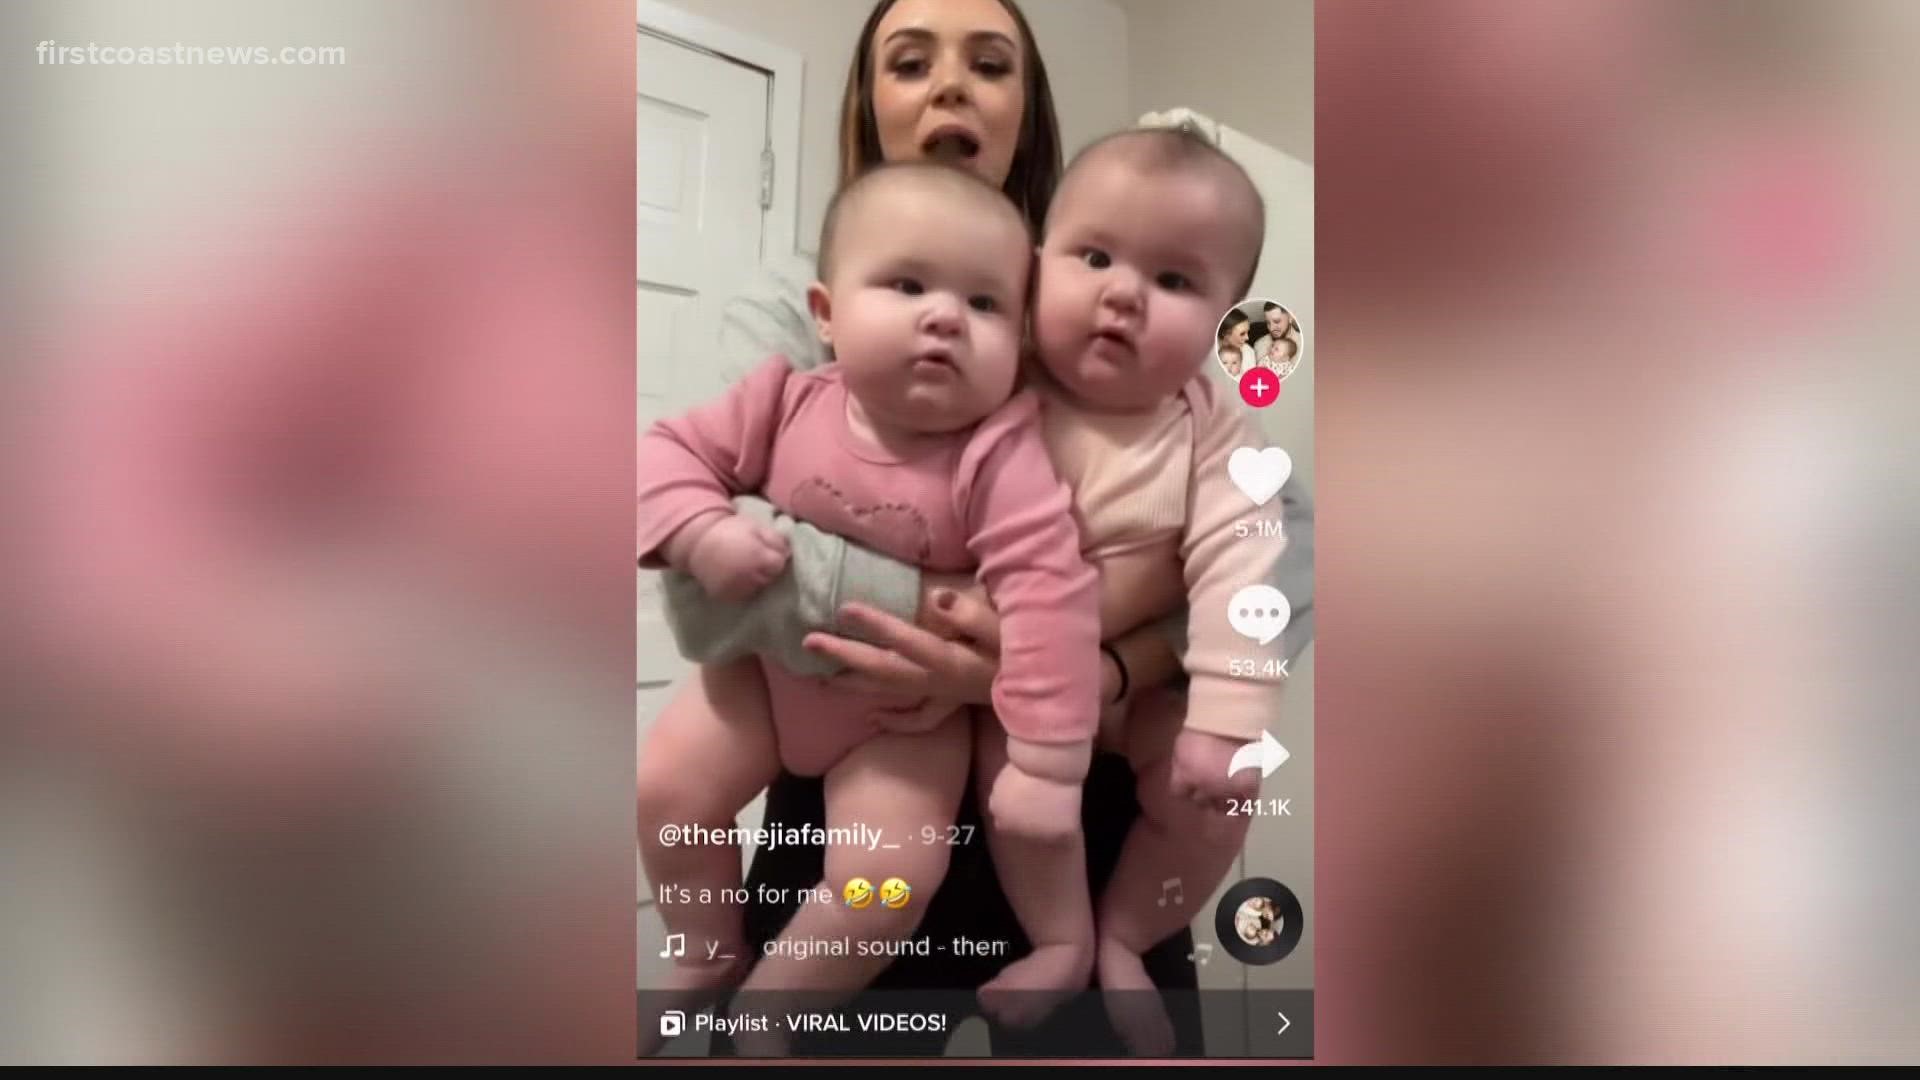 "The Tiny Mom" and her not-so-tiny babies are going TikTok famous.